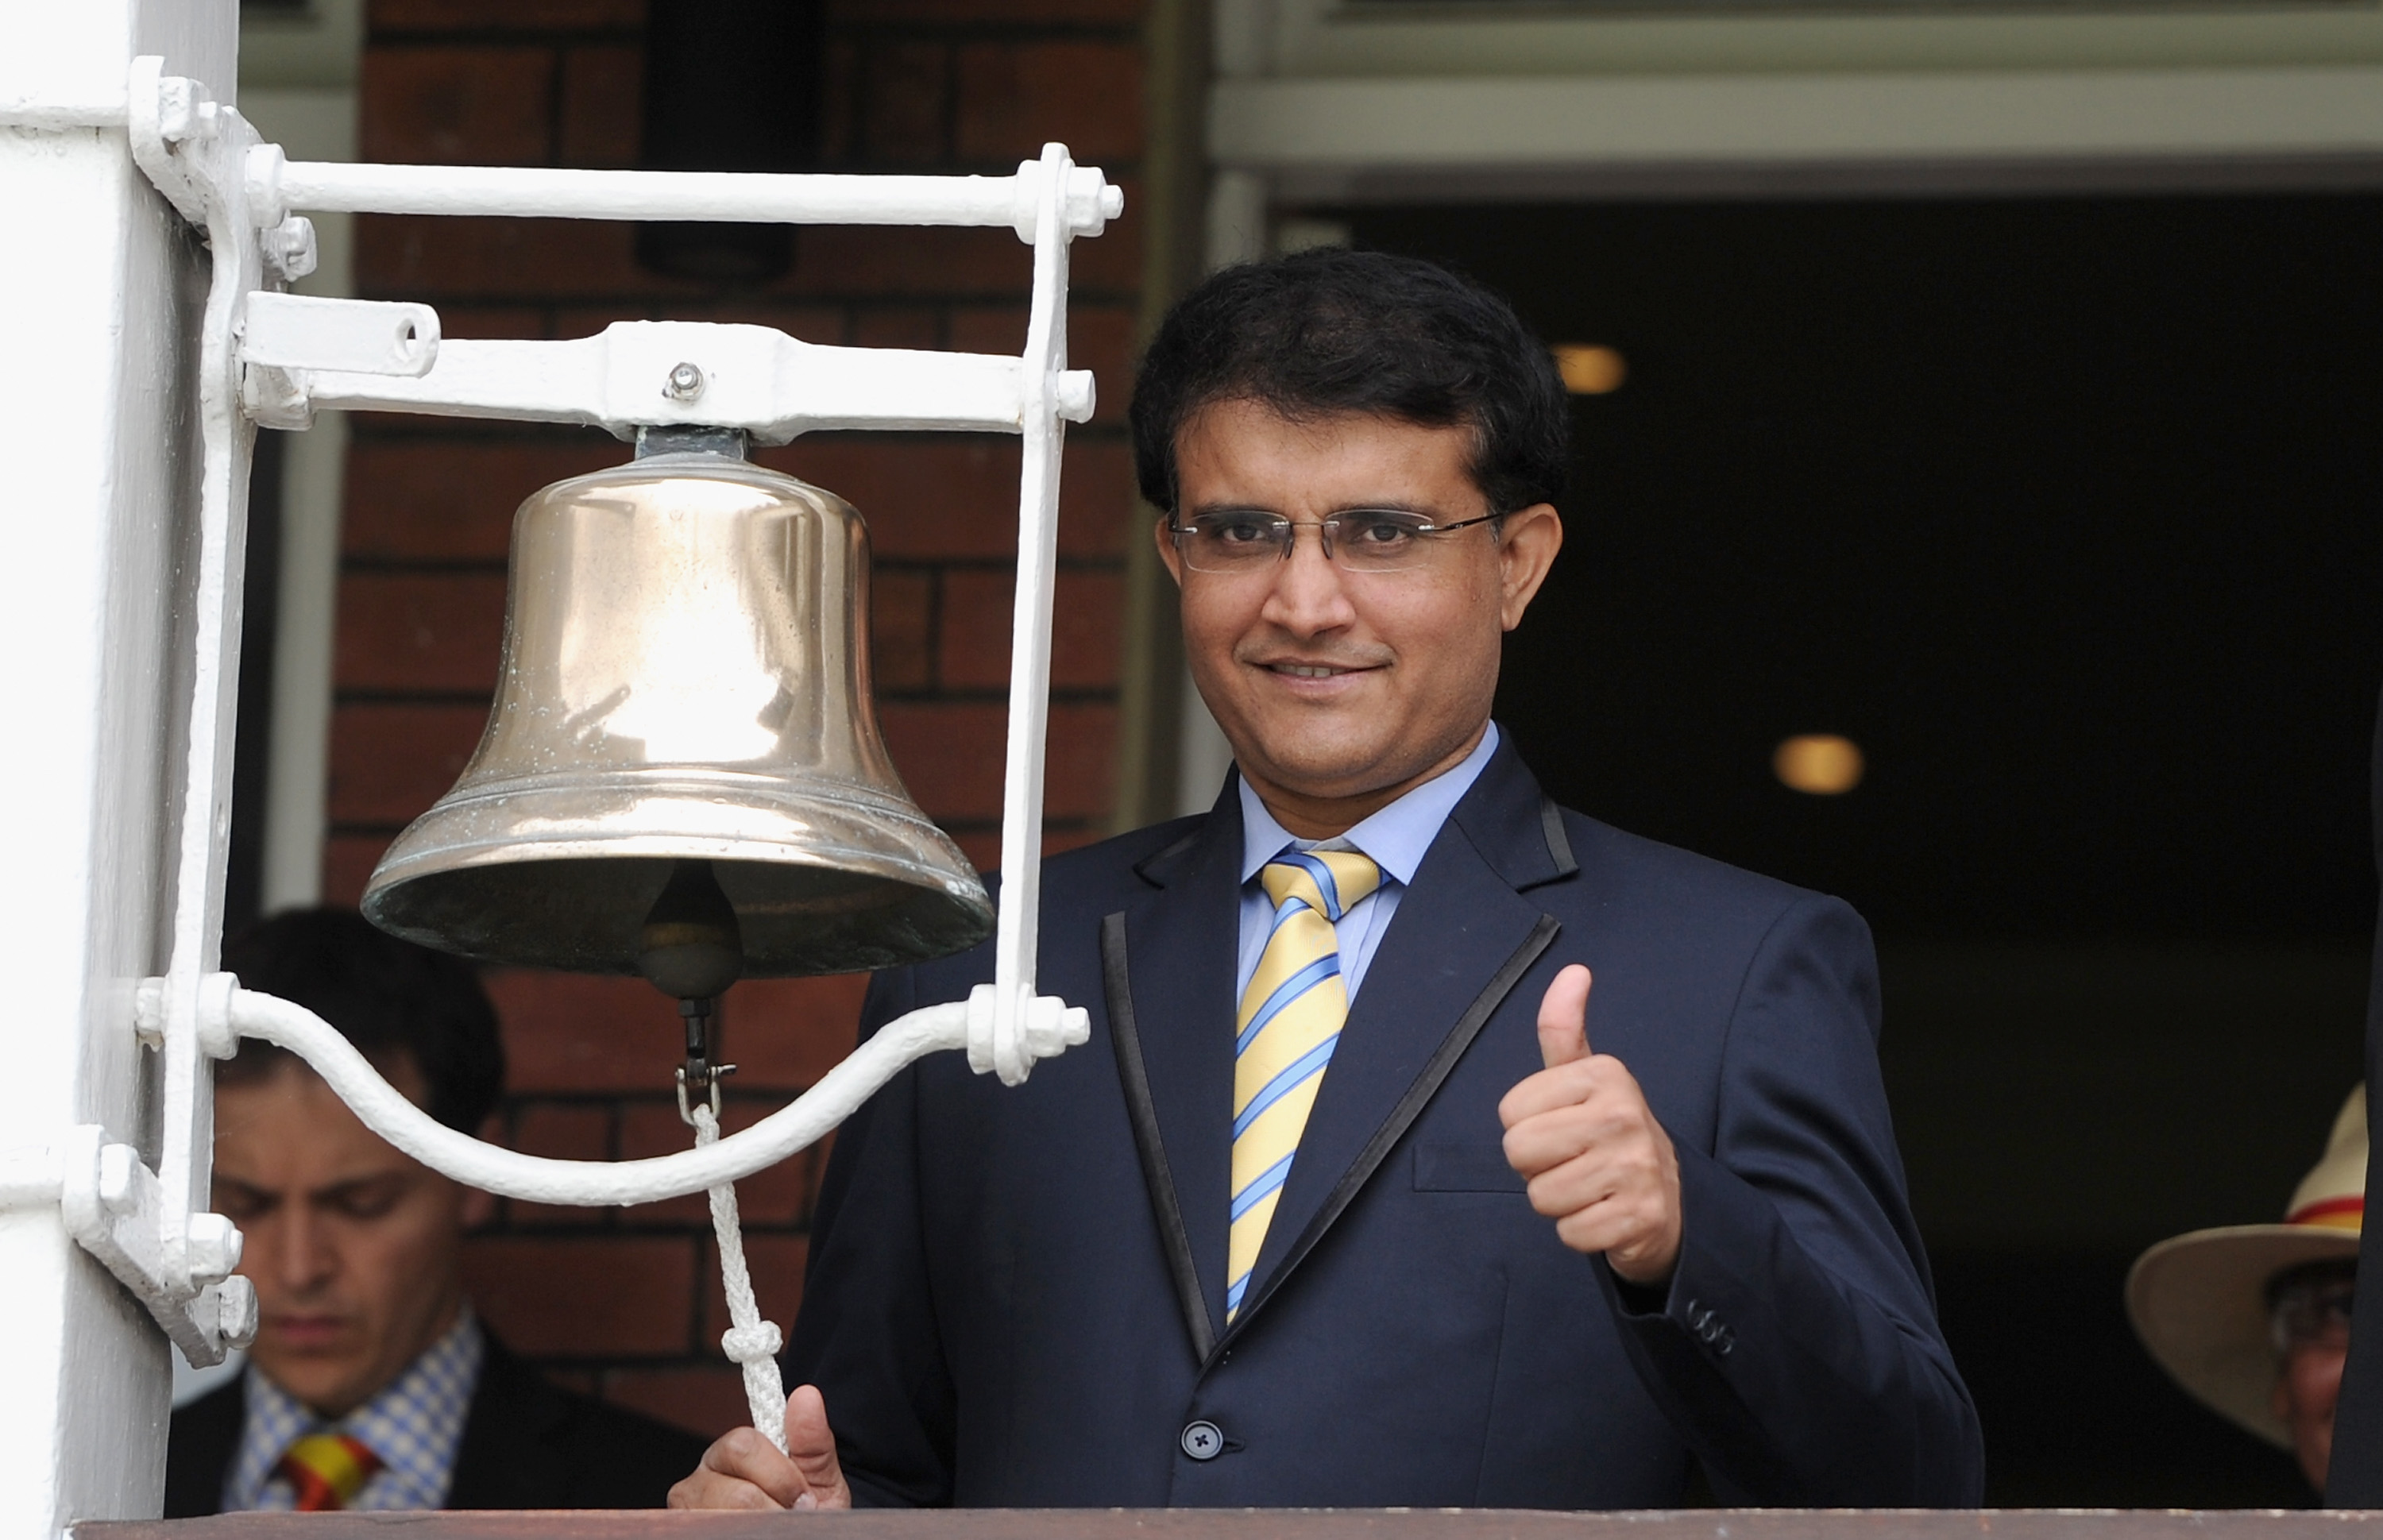 Yet to see the four-day Test proposal, states Sourav Ganguly